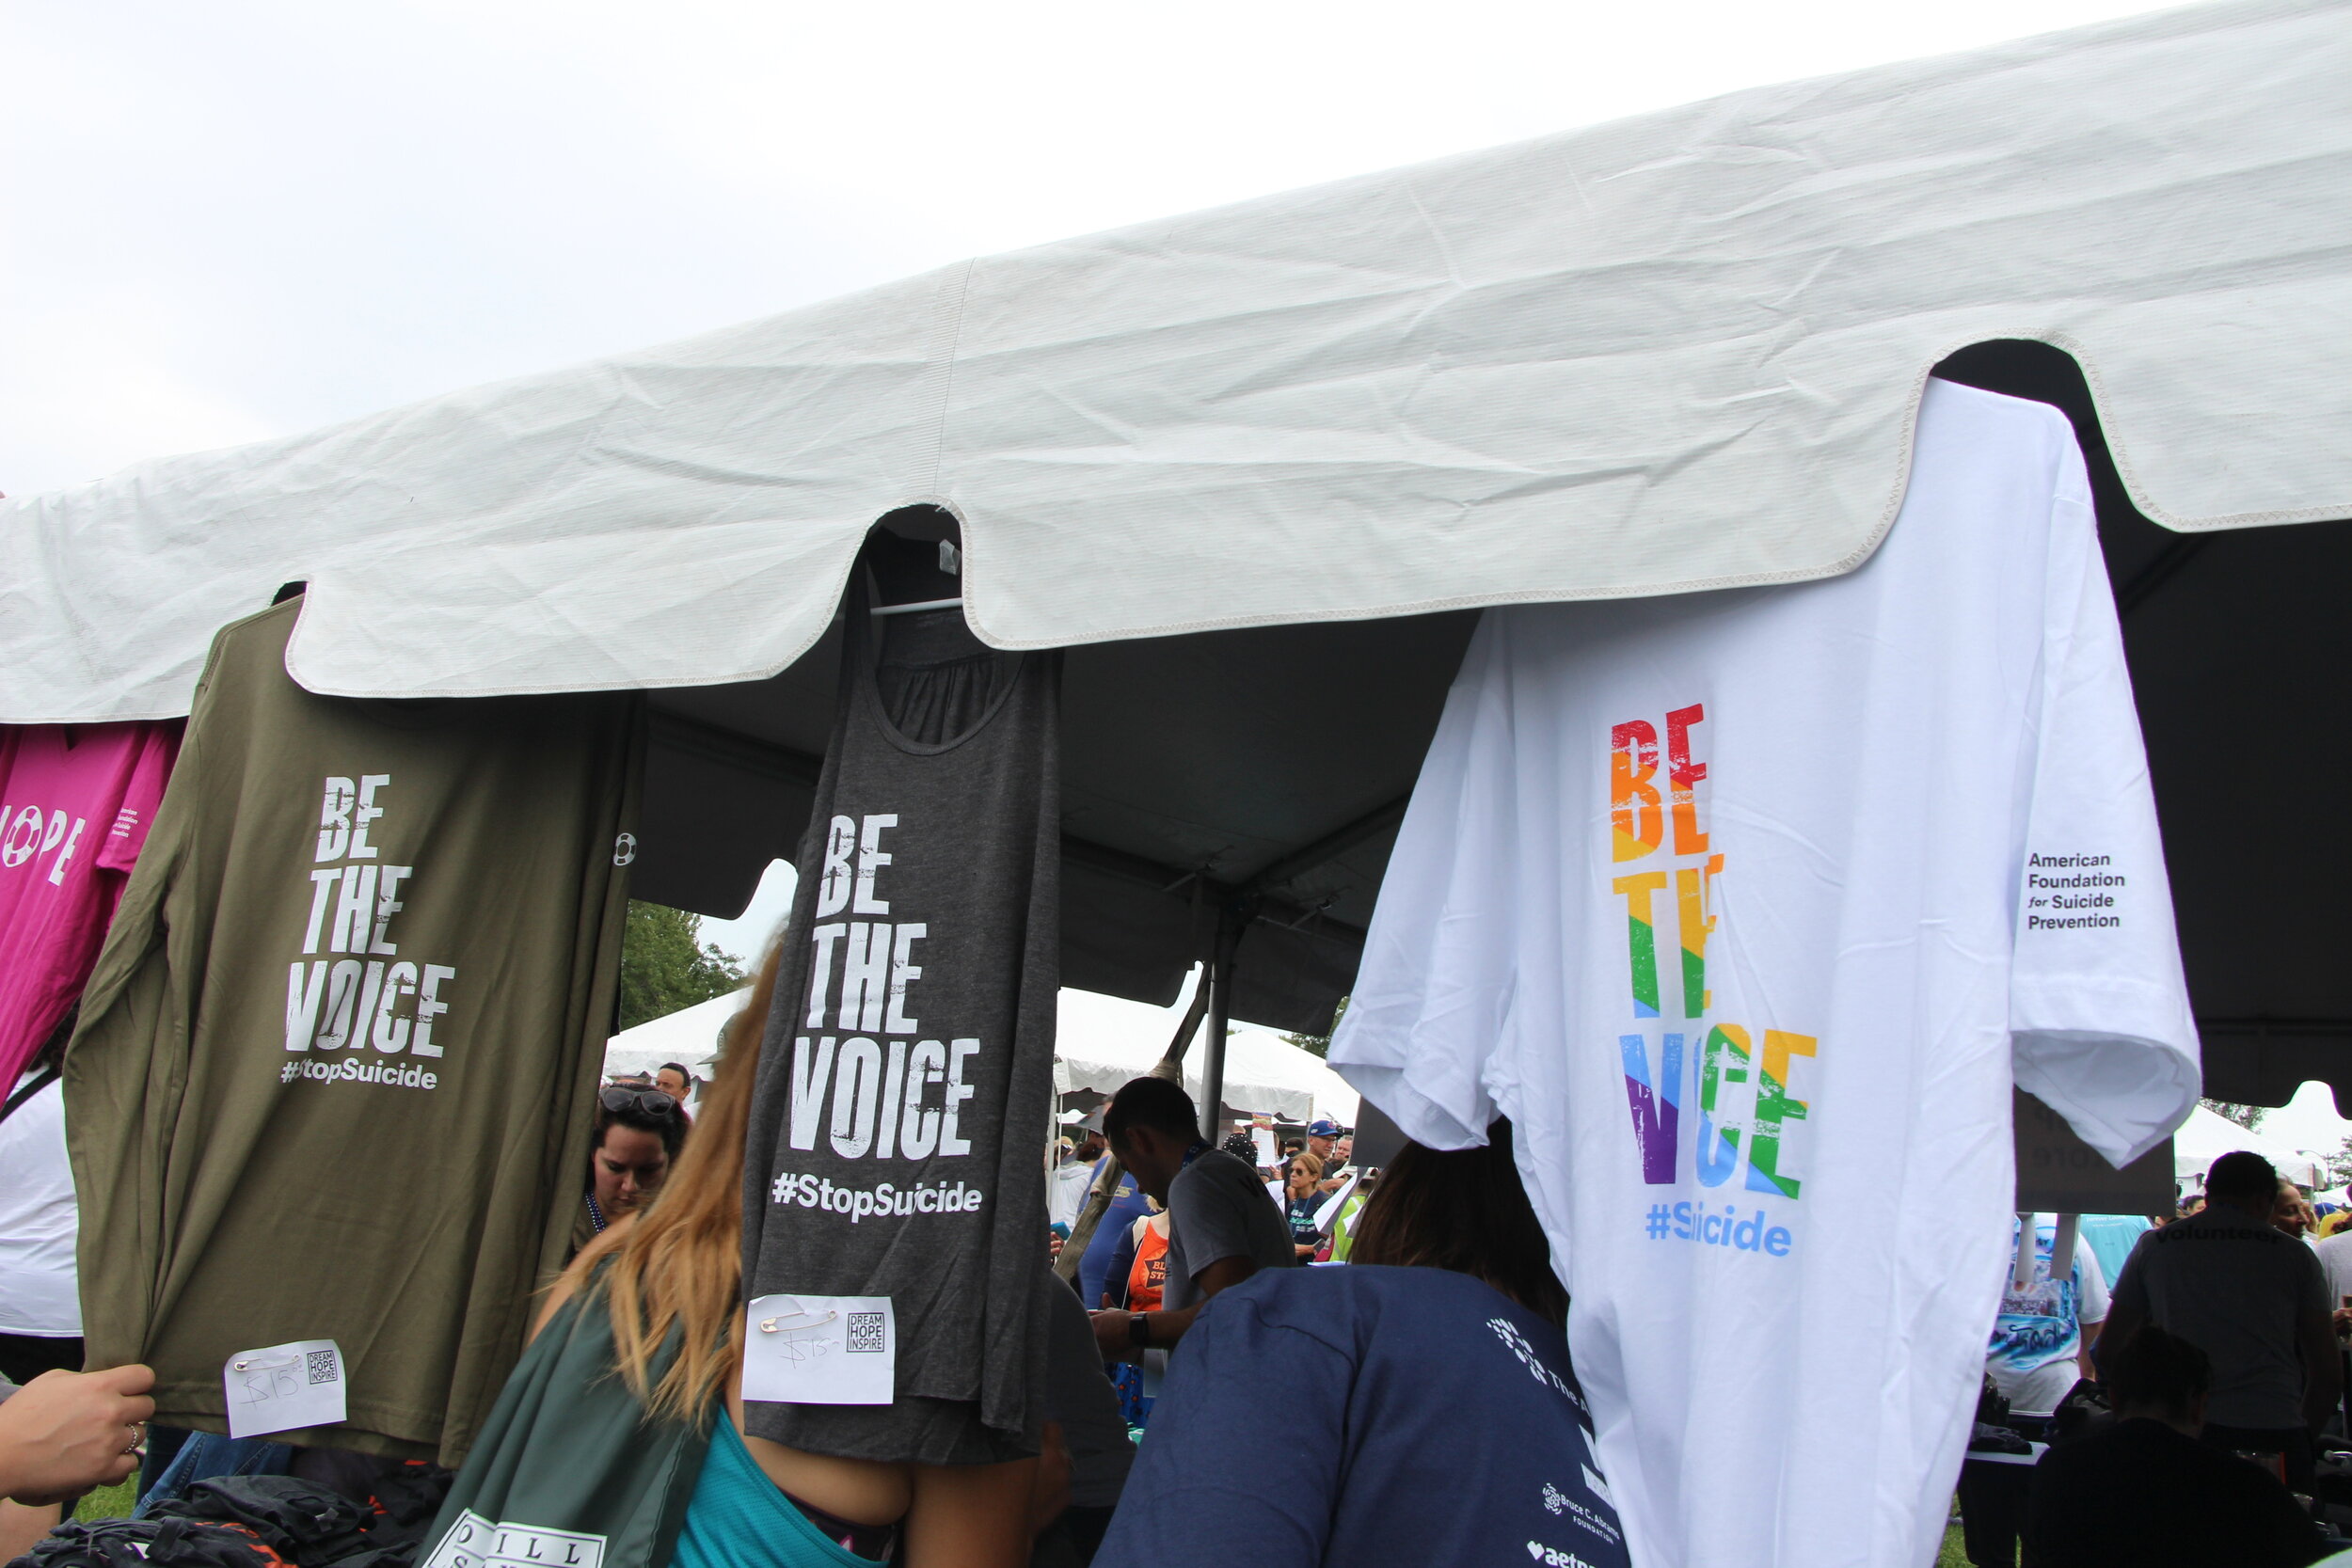 T-shirts with “Be the Voice” motifs for sale at the merchandise tents.